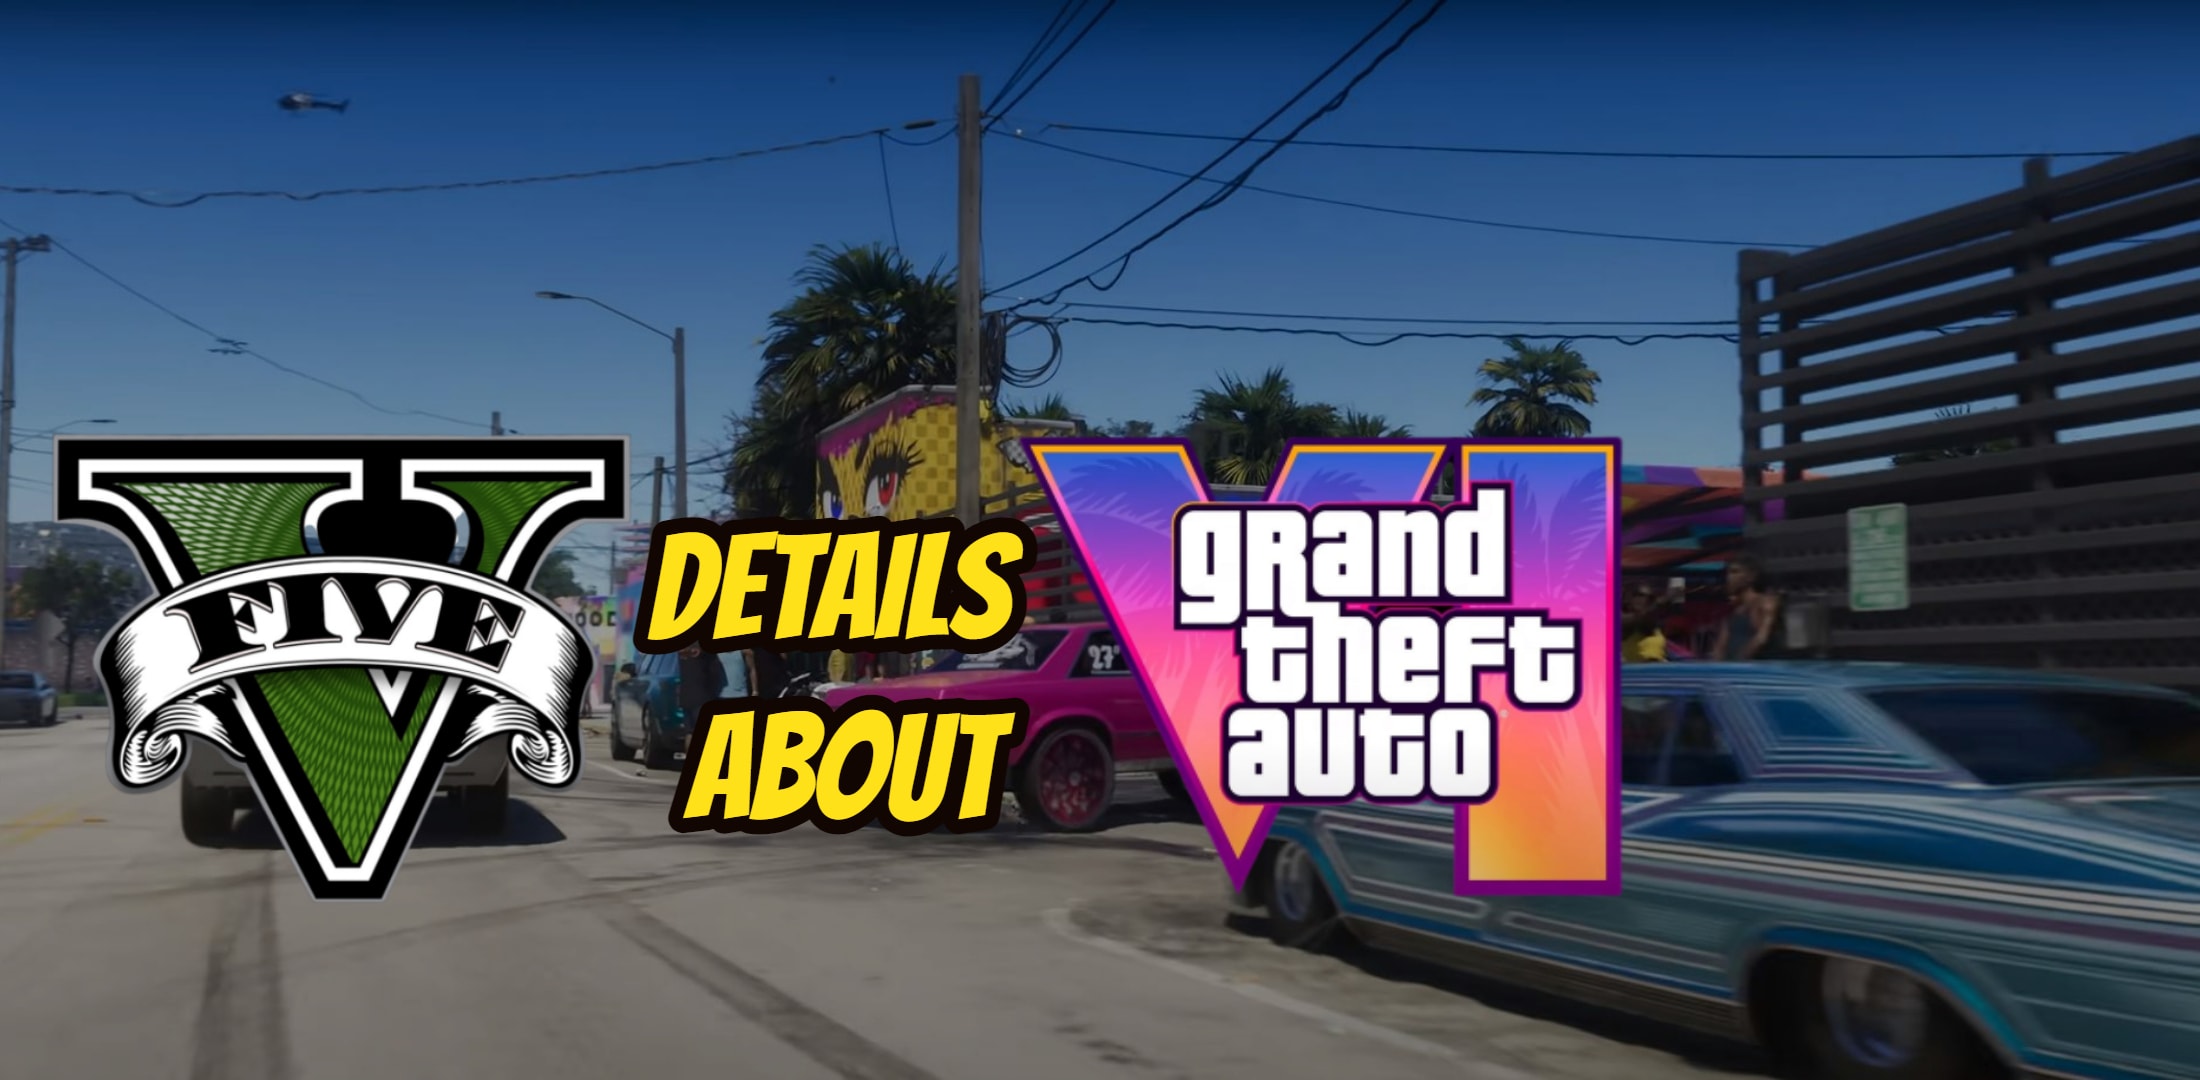 GTA 6 Map Is Being Pieced Together With MS Paint and Google Earth